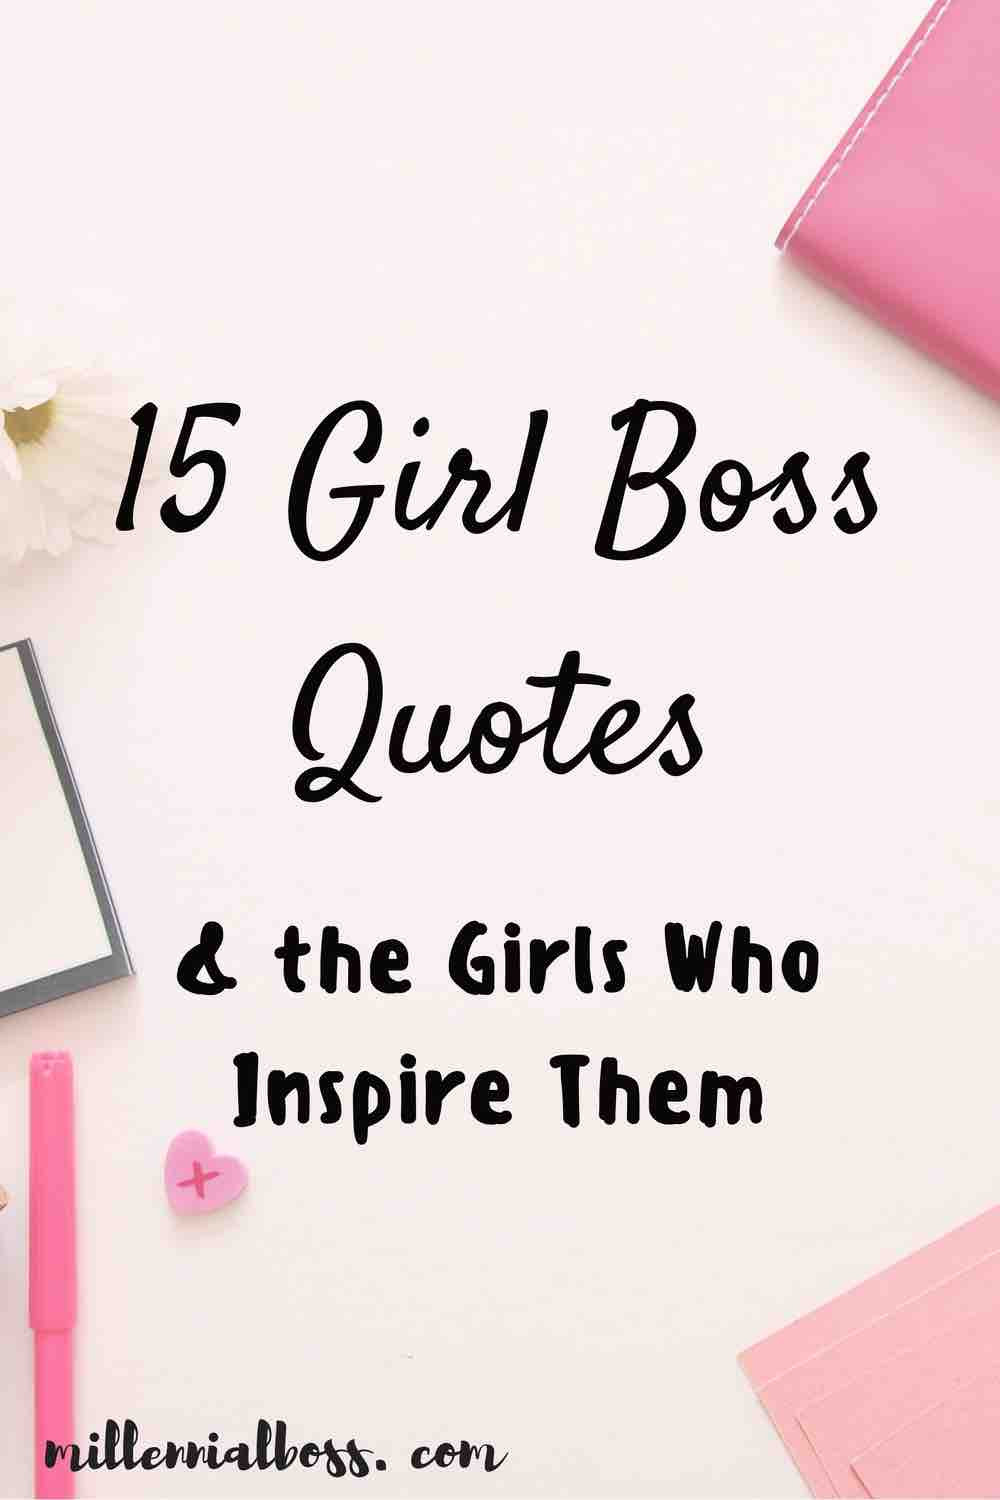 Motivational Girl Quotes
 15 Girl Boss Quotes & the Girls Who Inspire Them